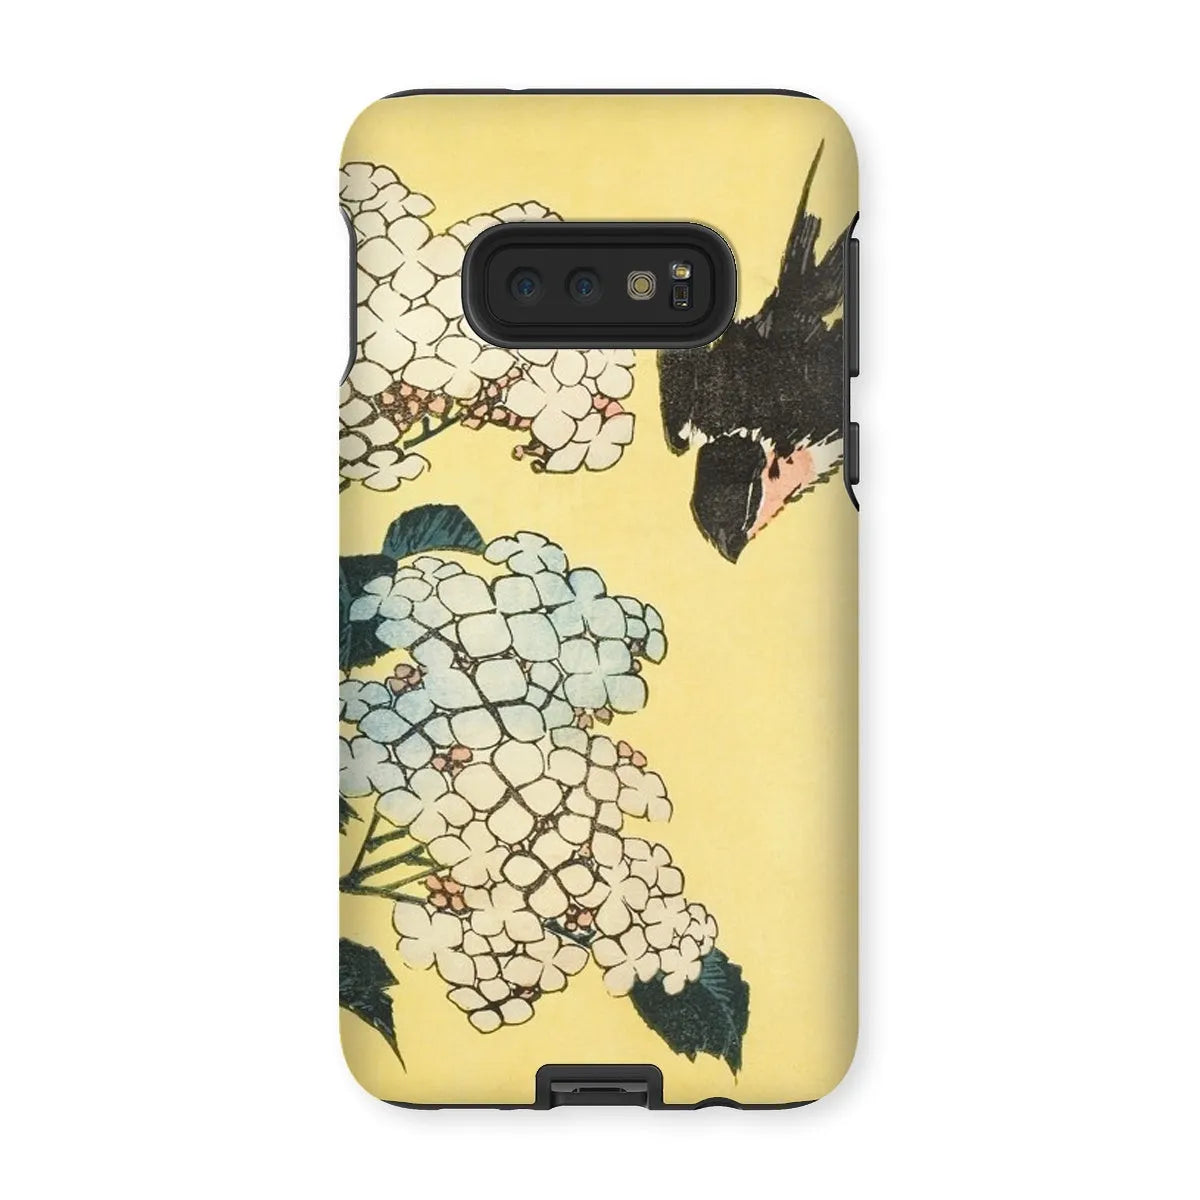 Hydrangea And Swallow - Japanese Art Phone Case - Hokusai - Samsung Galaxy S10e / Matte - Mobile Phone Cases